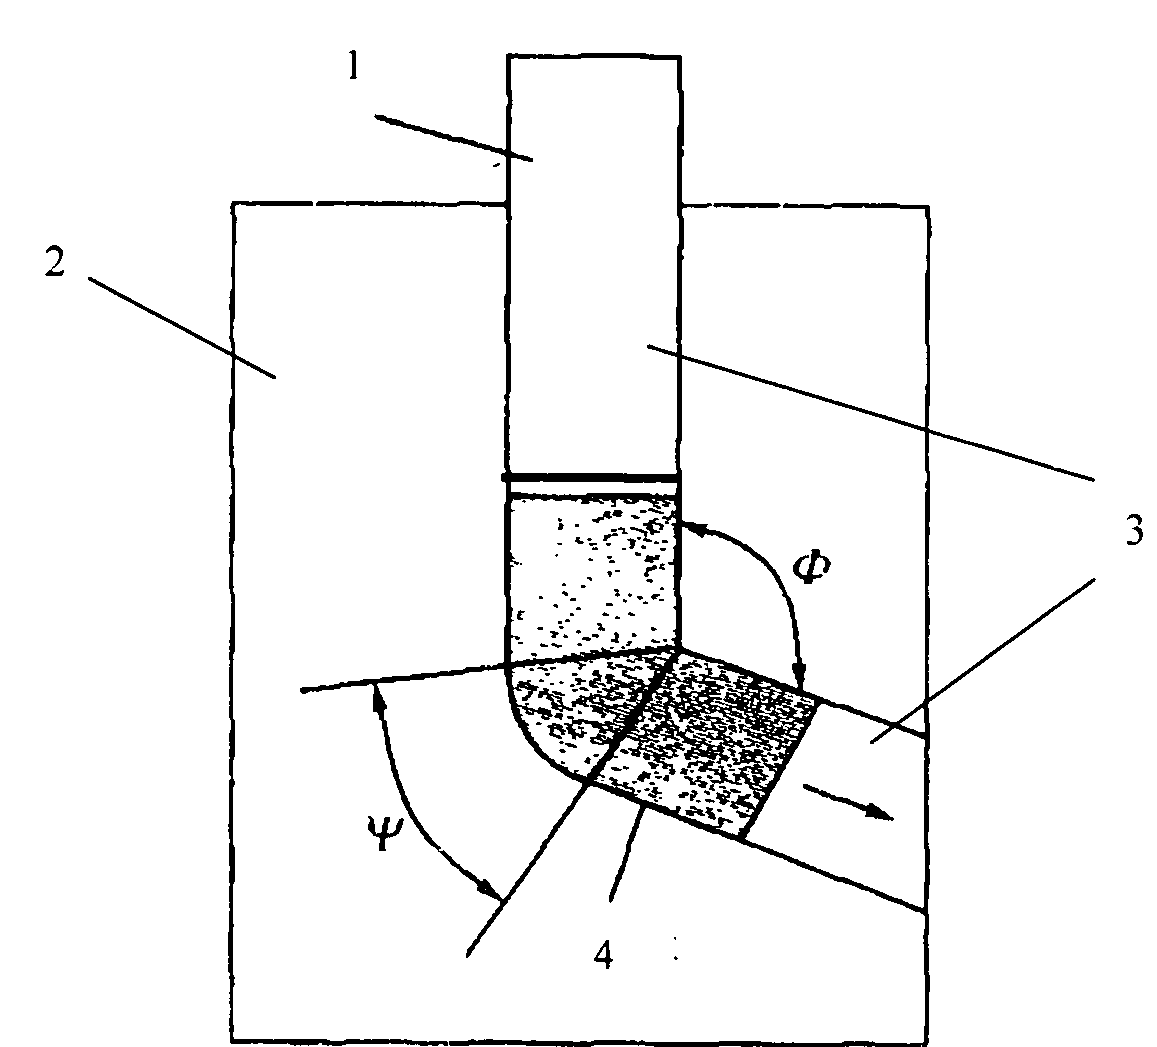 Preparation method of laminated composite materials of different alloys